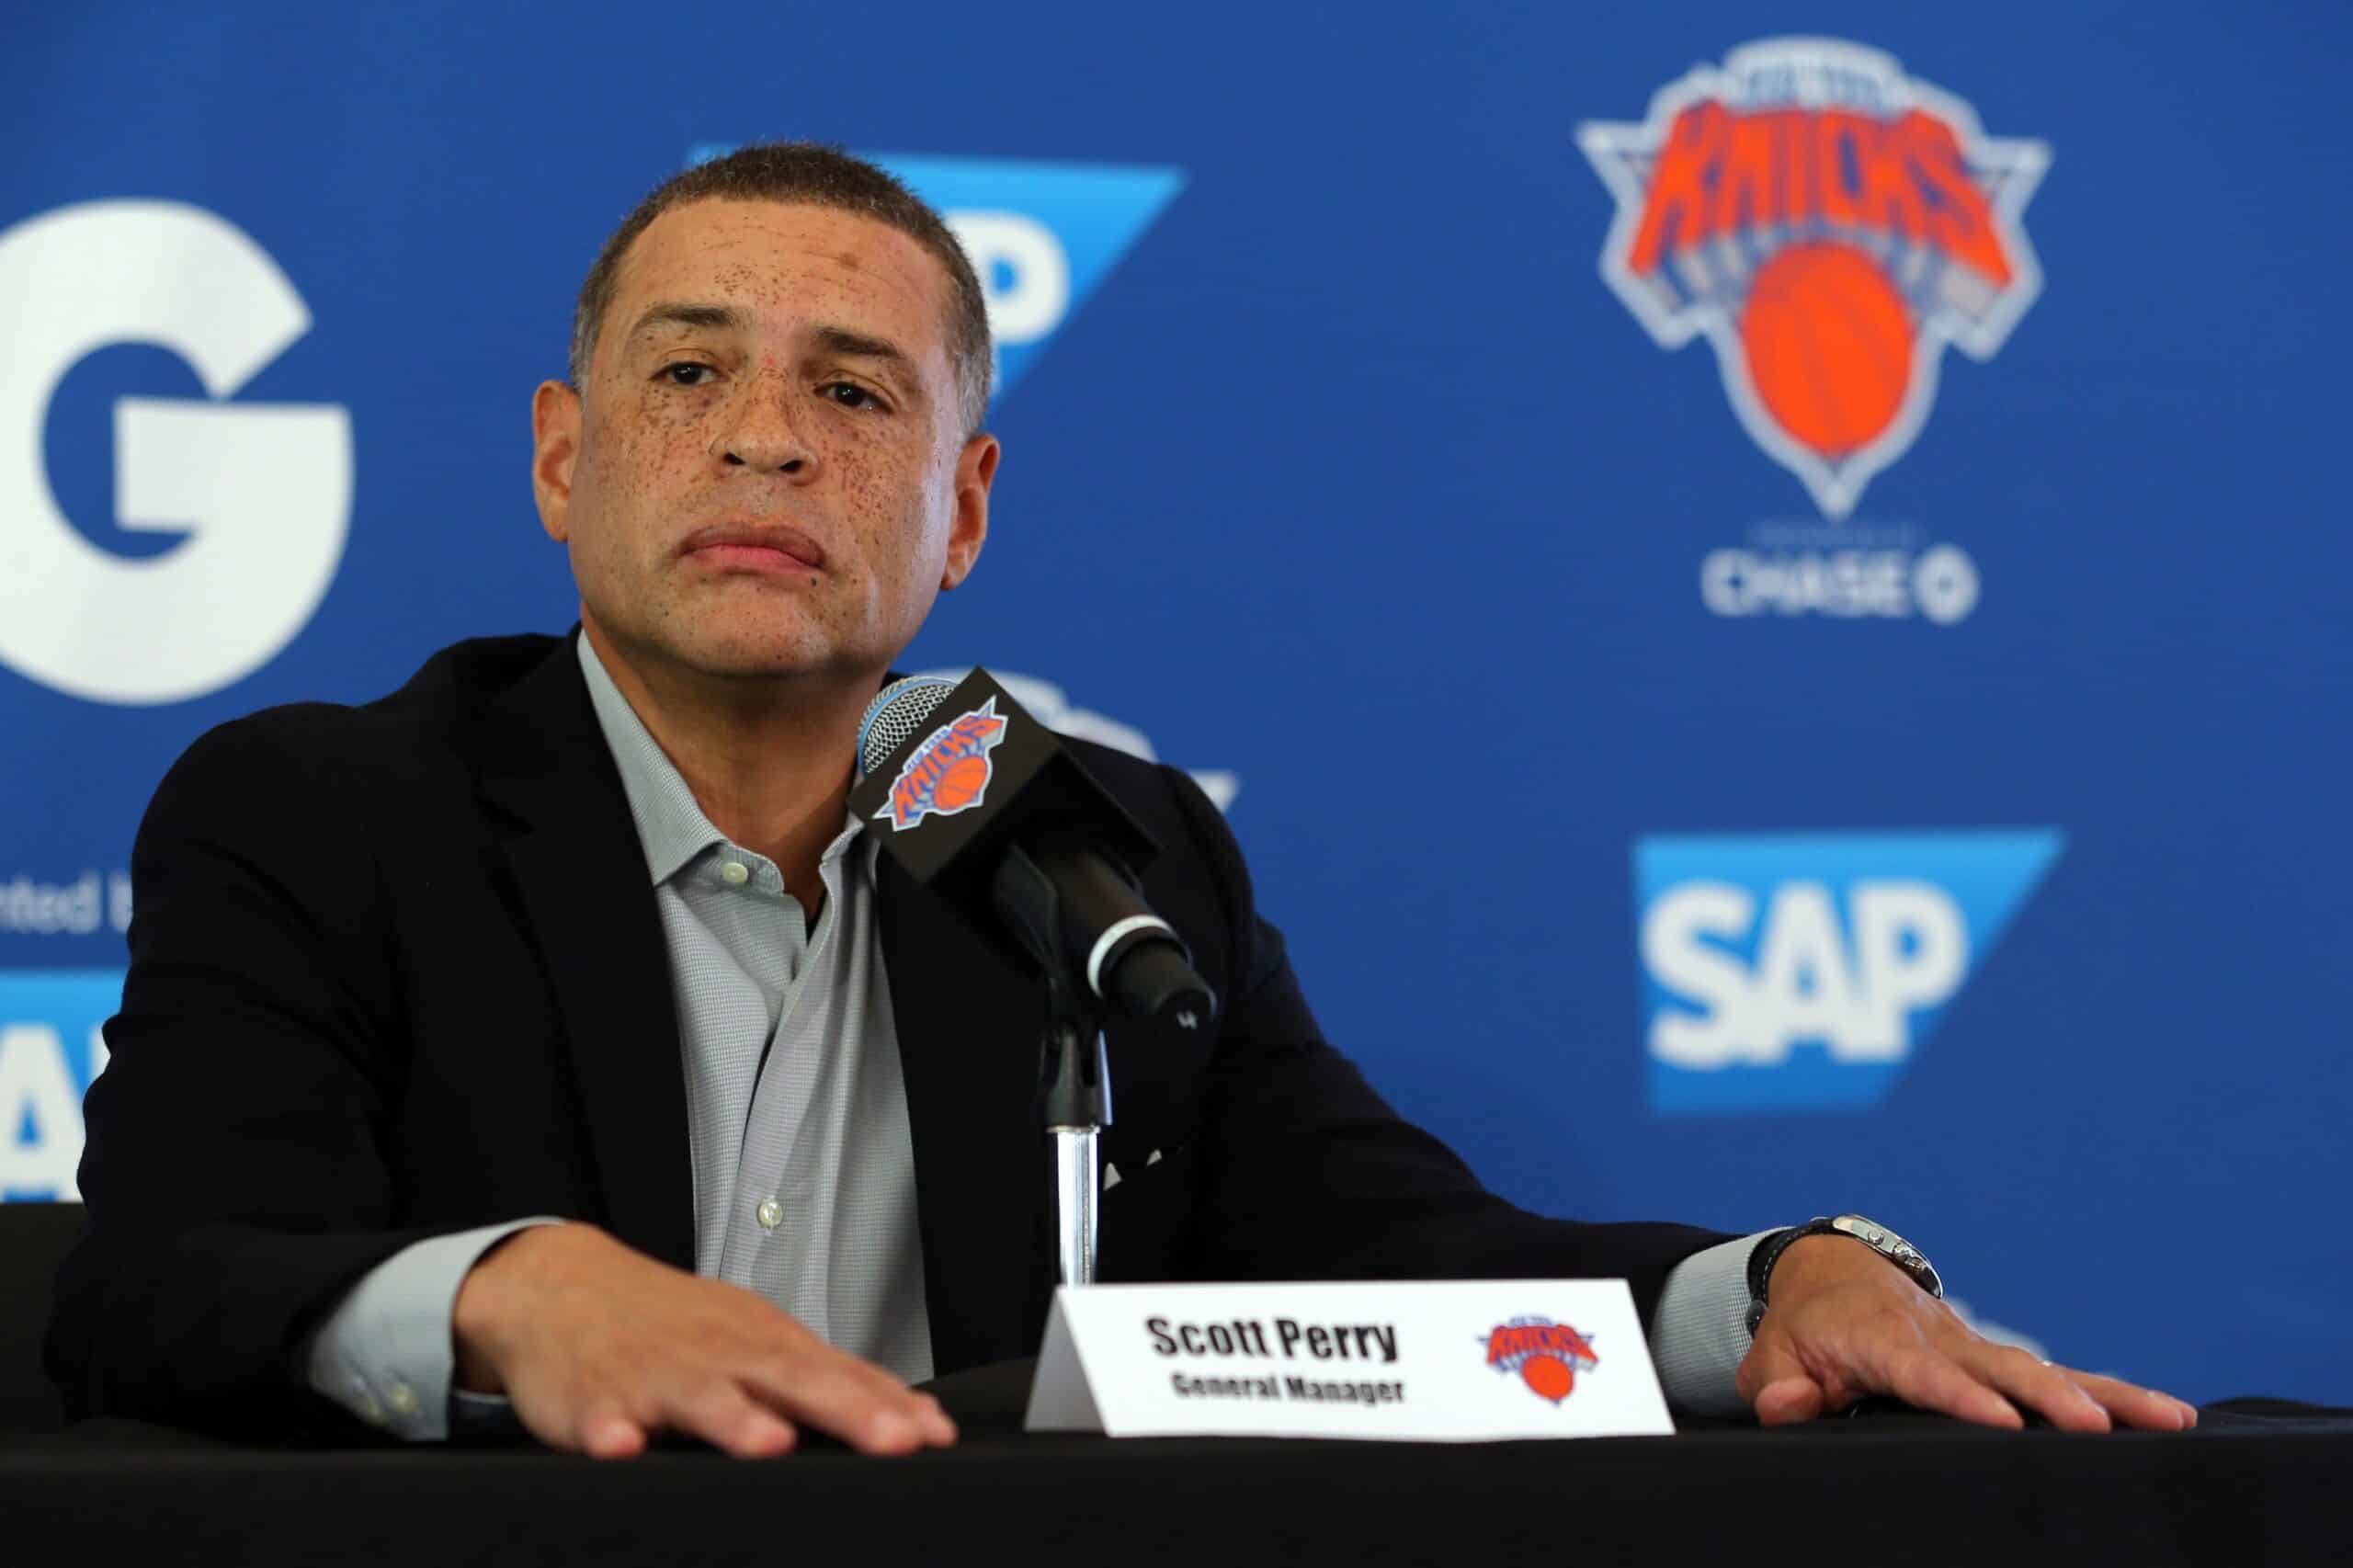 Scott Perry sitting at a press conference Knicks